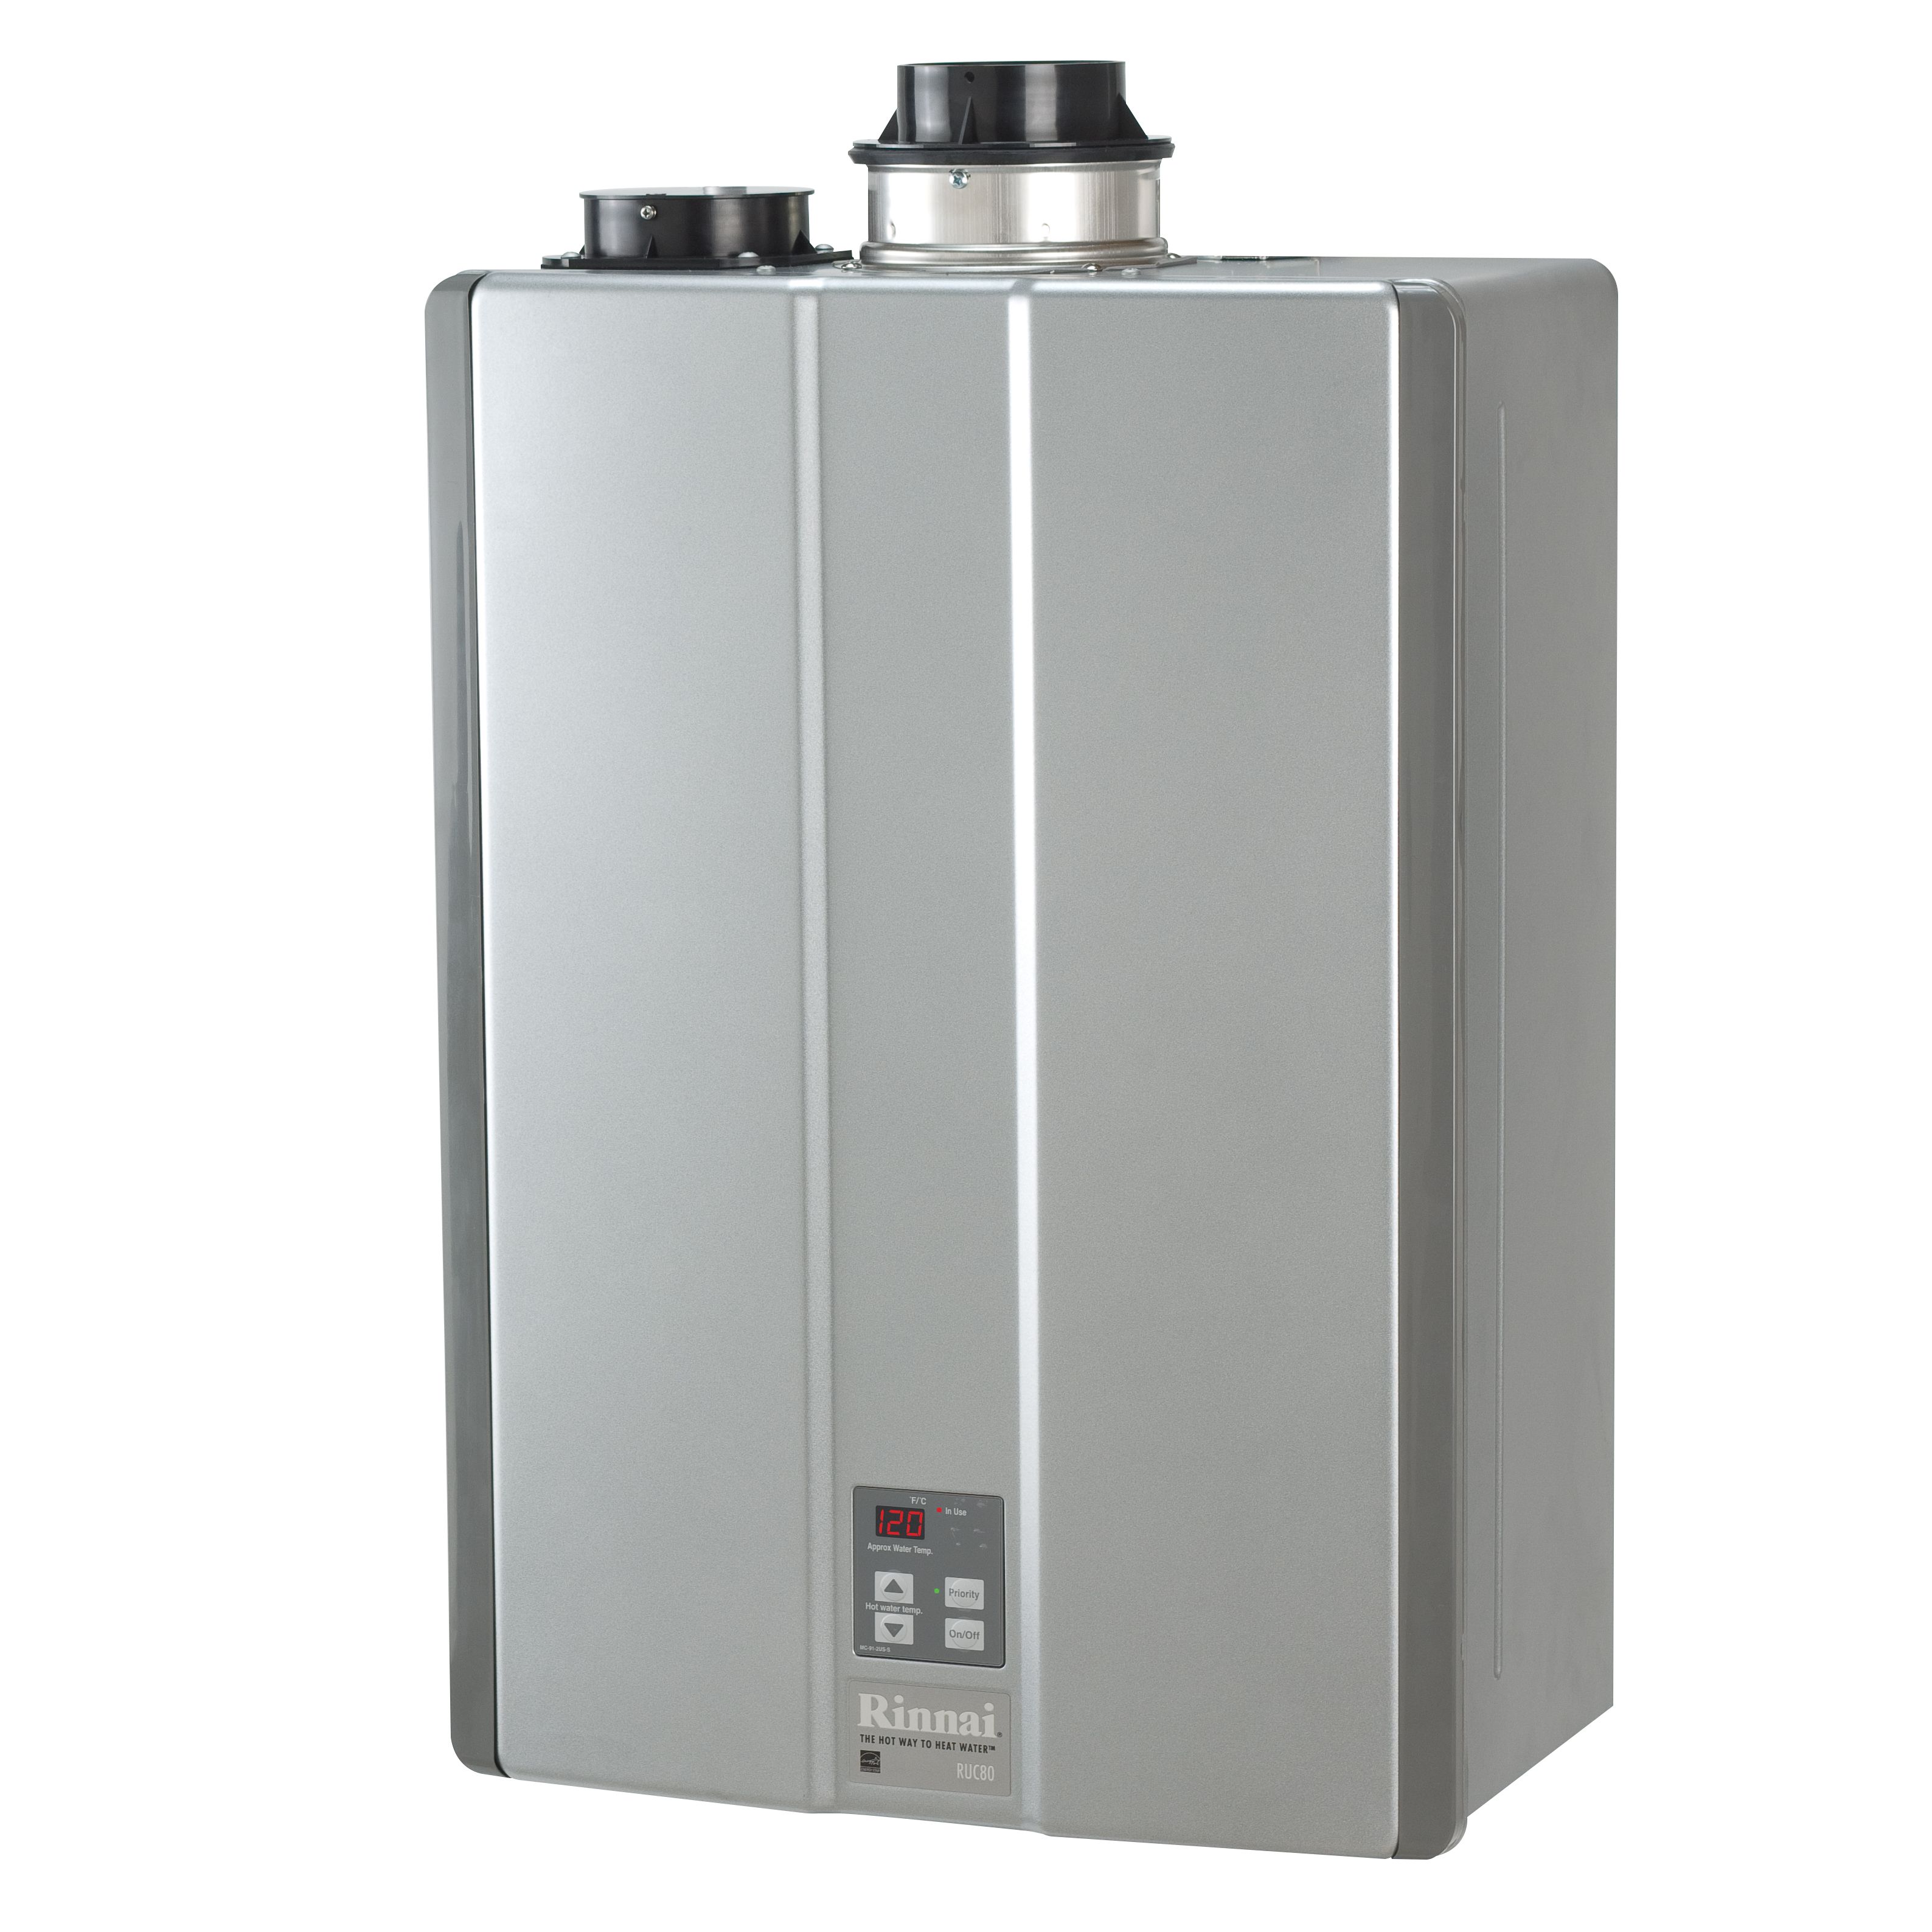 Best Tankless Water Heater Buyers Guide 2021 ReviewThis